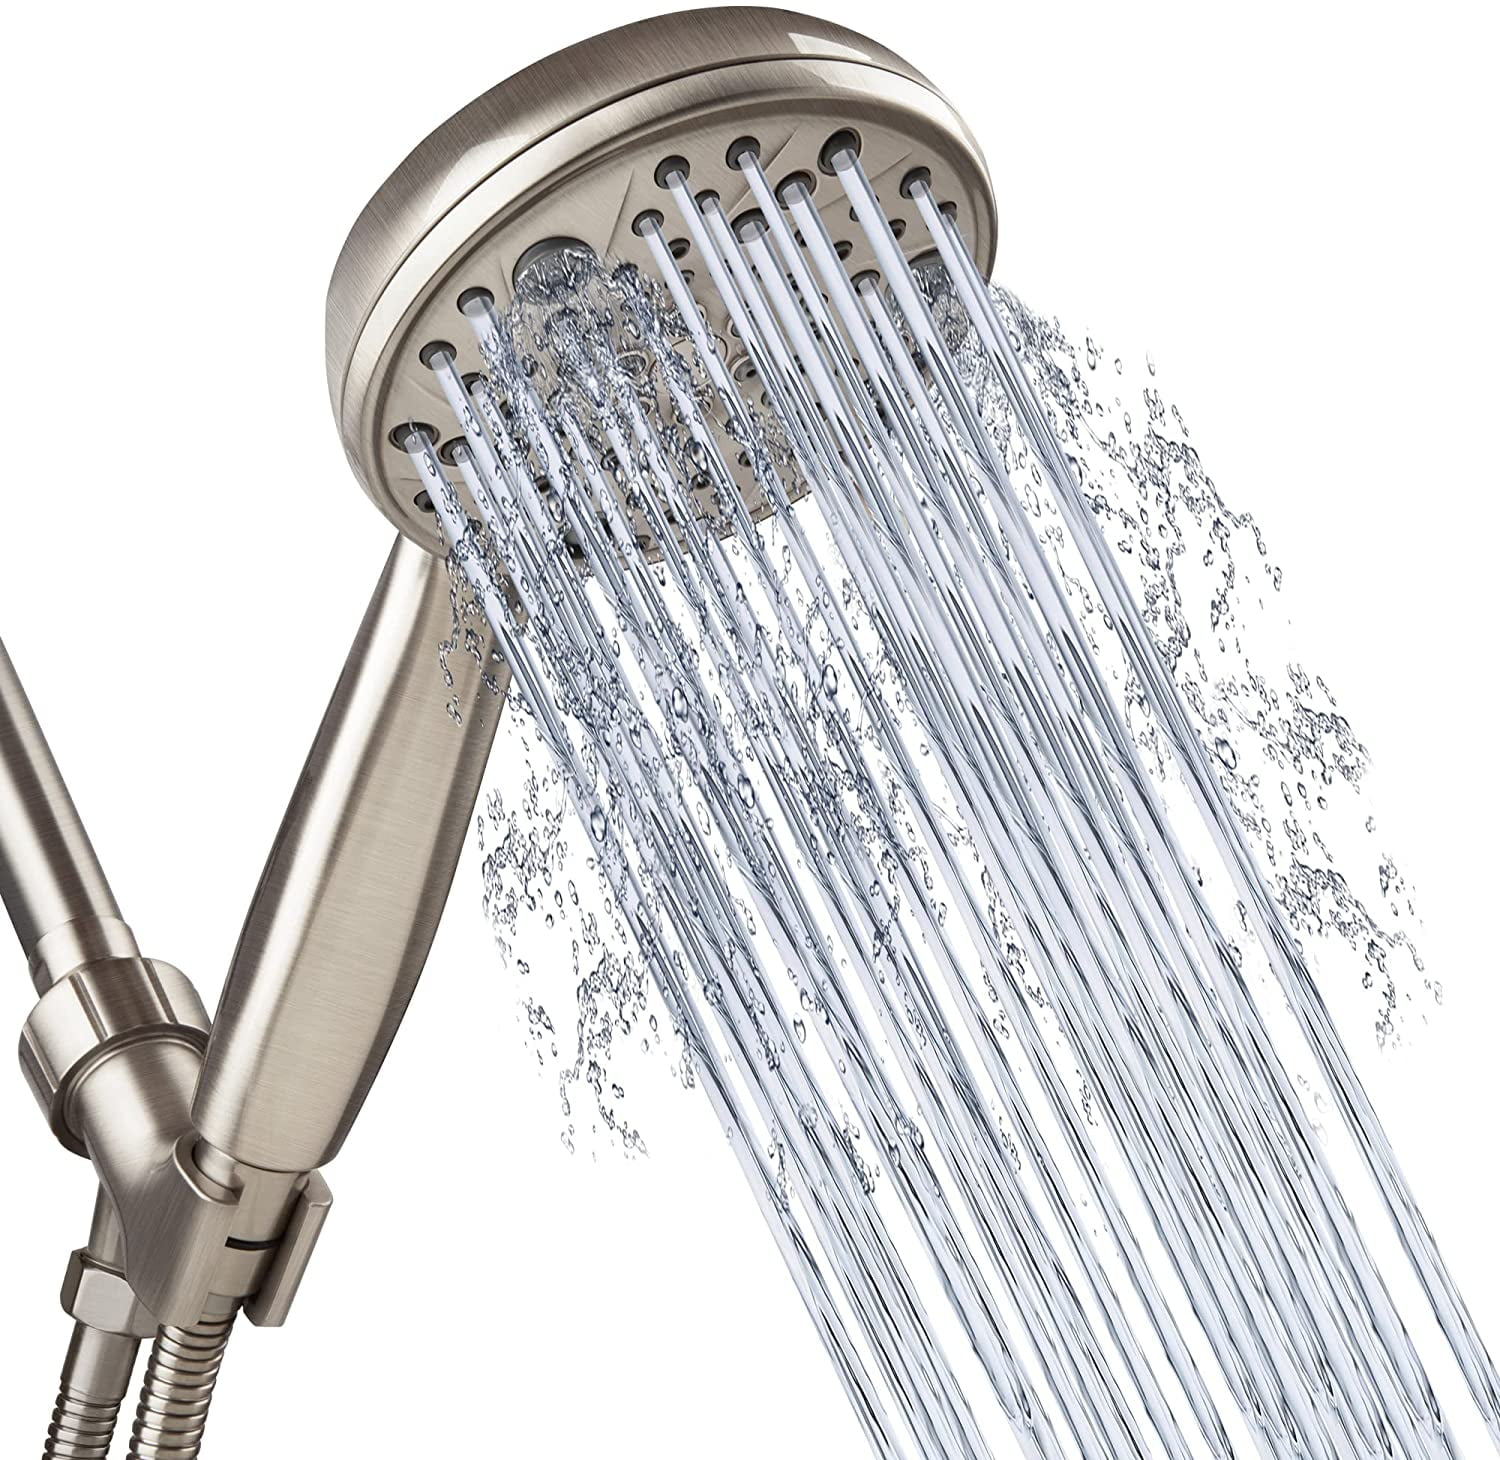 7 Adjustable Spray Models Handheld Shower Only Shower Head with Teflon Tape A-SHOW Multifunctional High Pressure Shower Head Water Saving Bathing for Adults Children Pets Universal for Bathroom